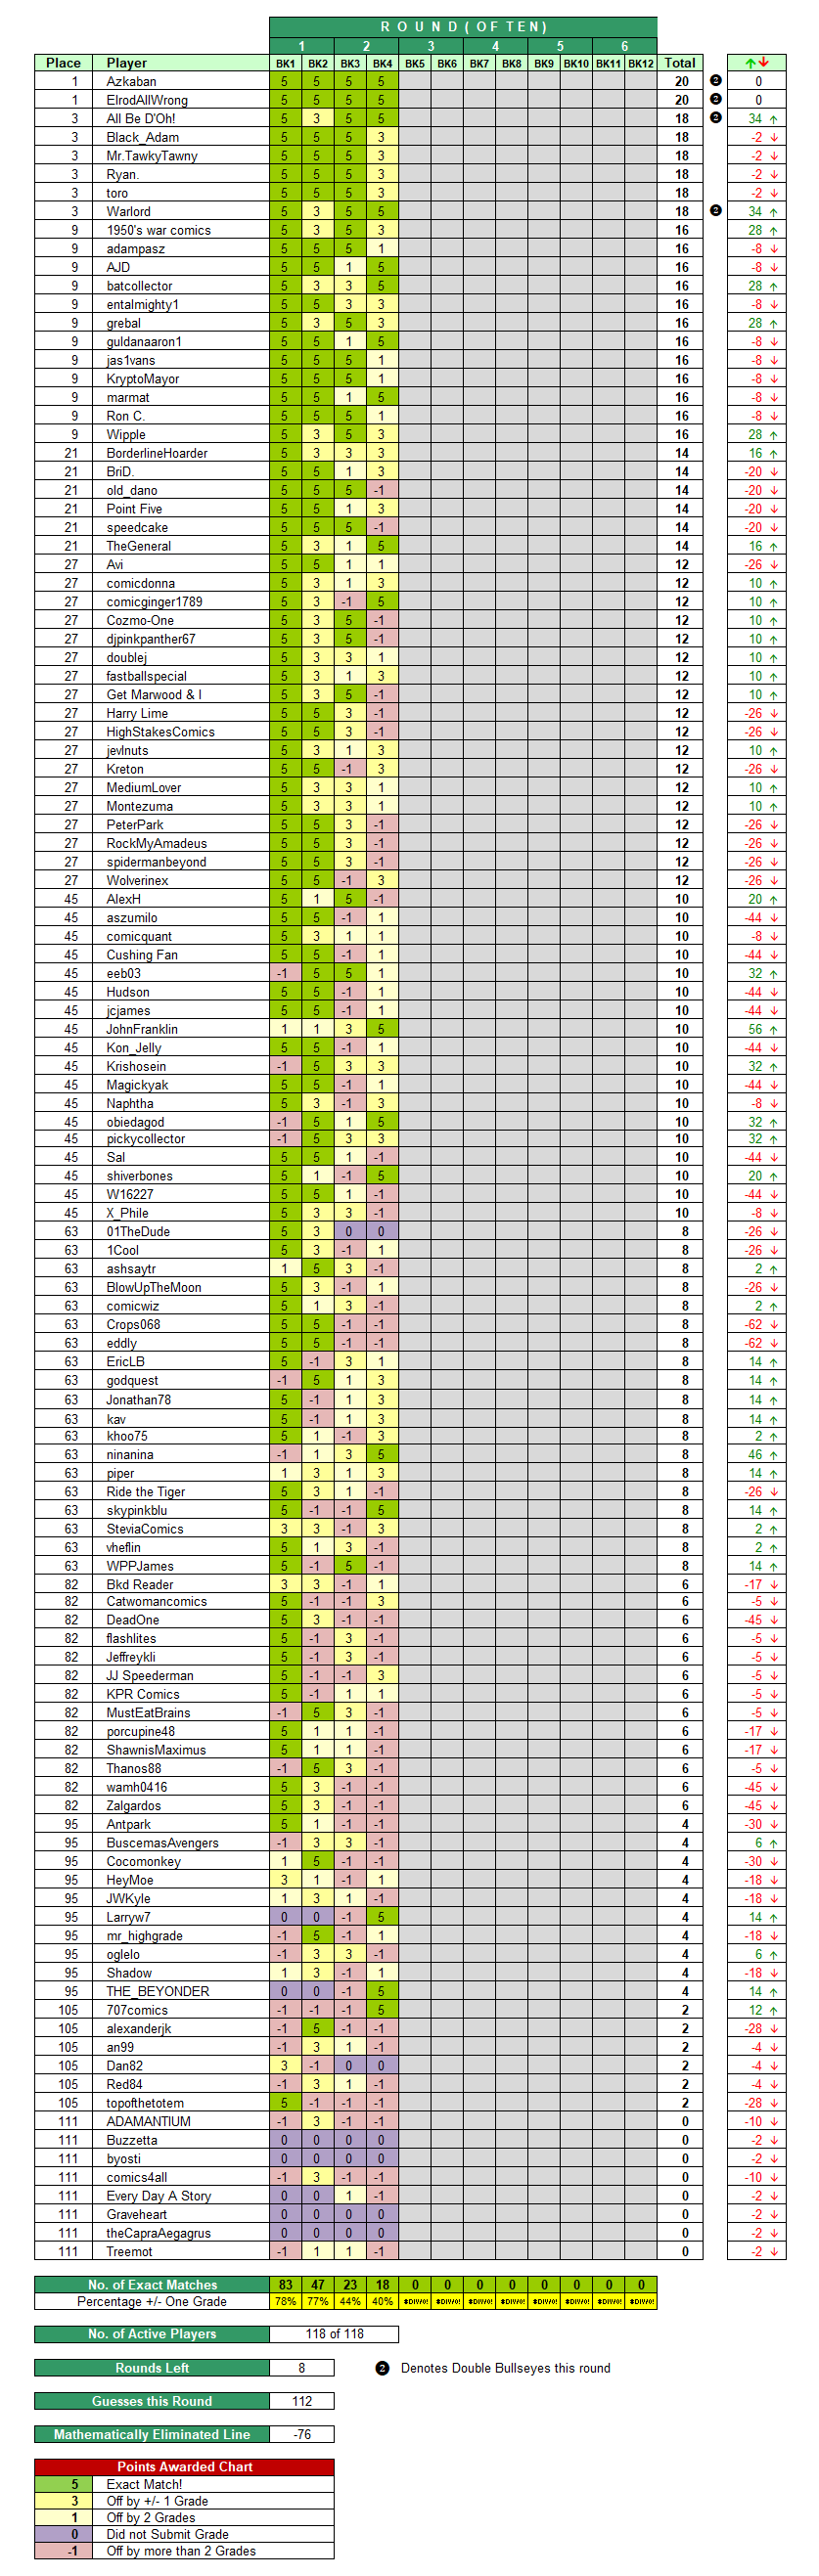 Round-2-Leaderboard.png